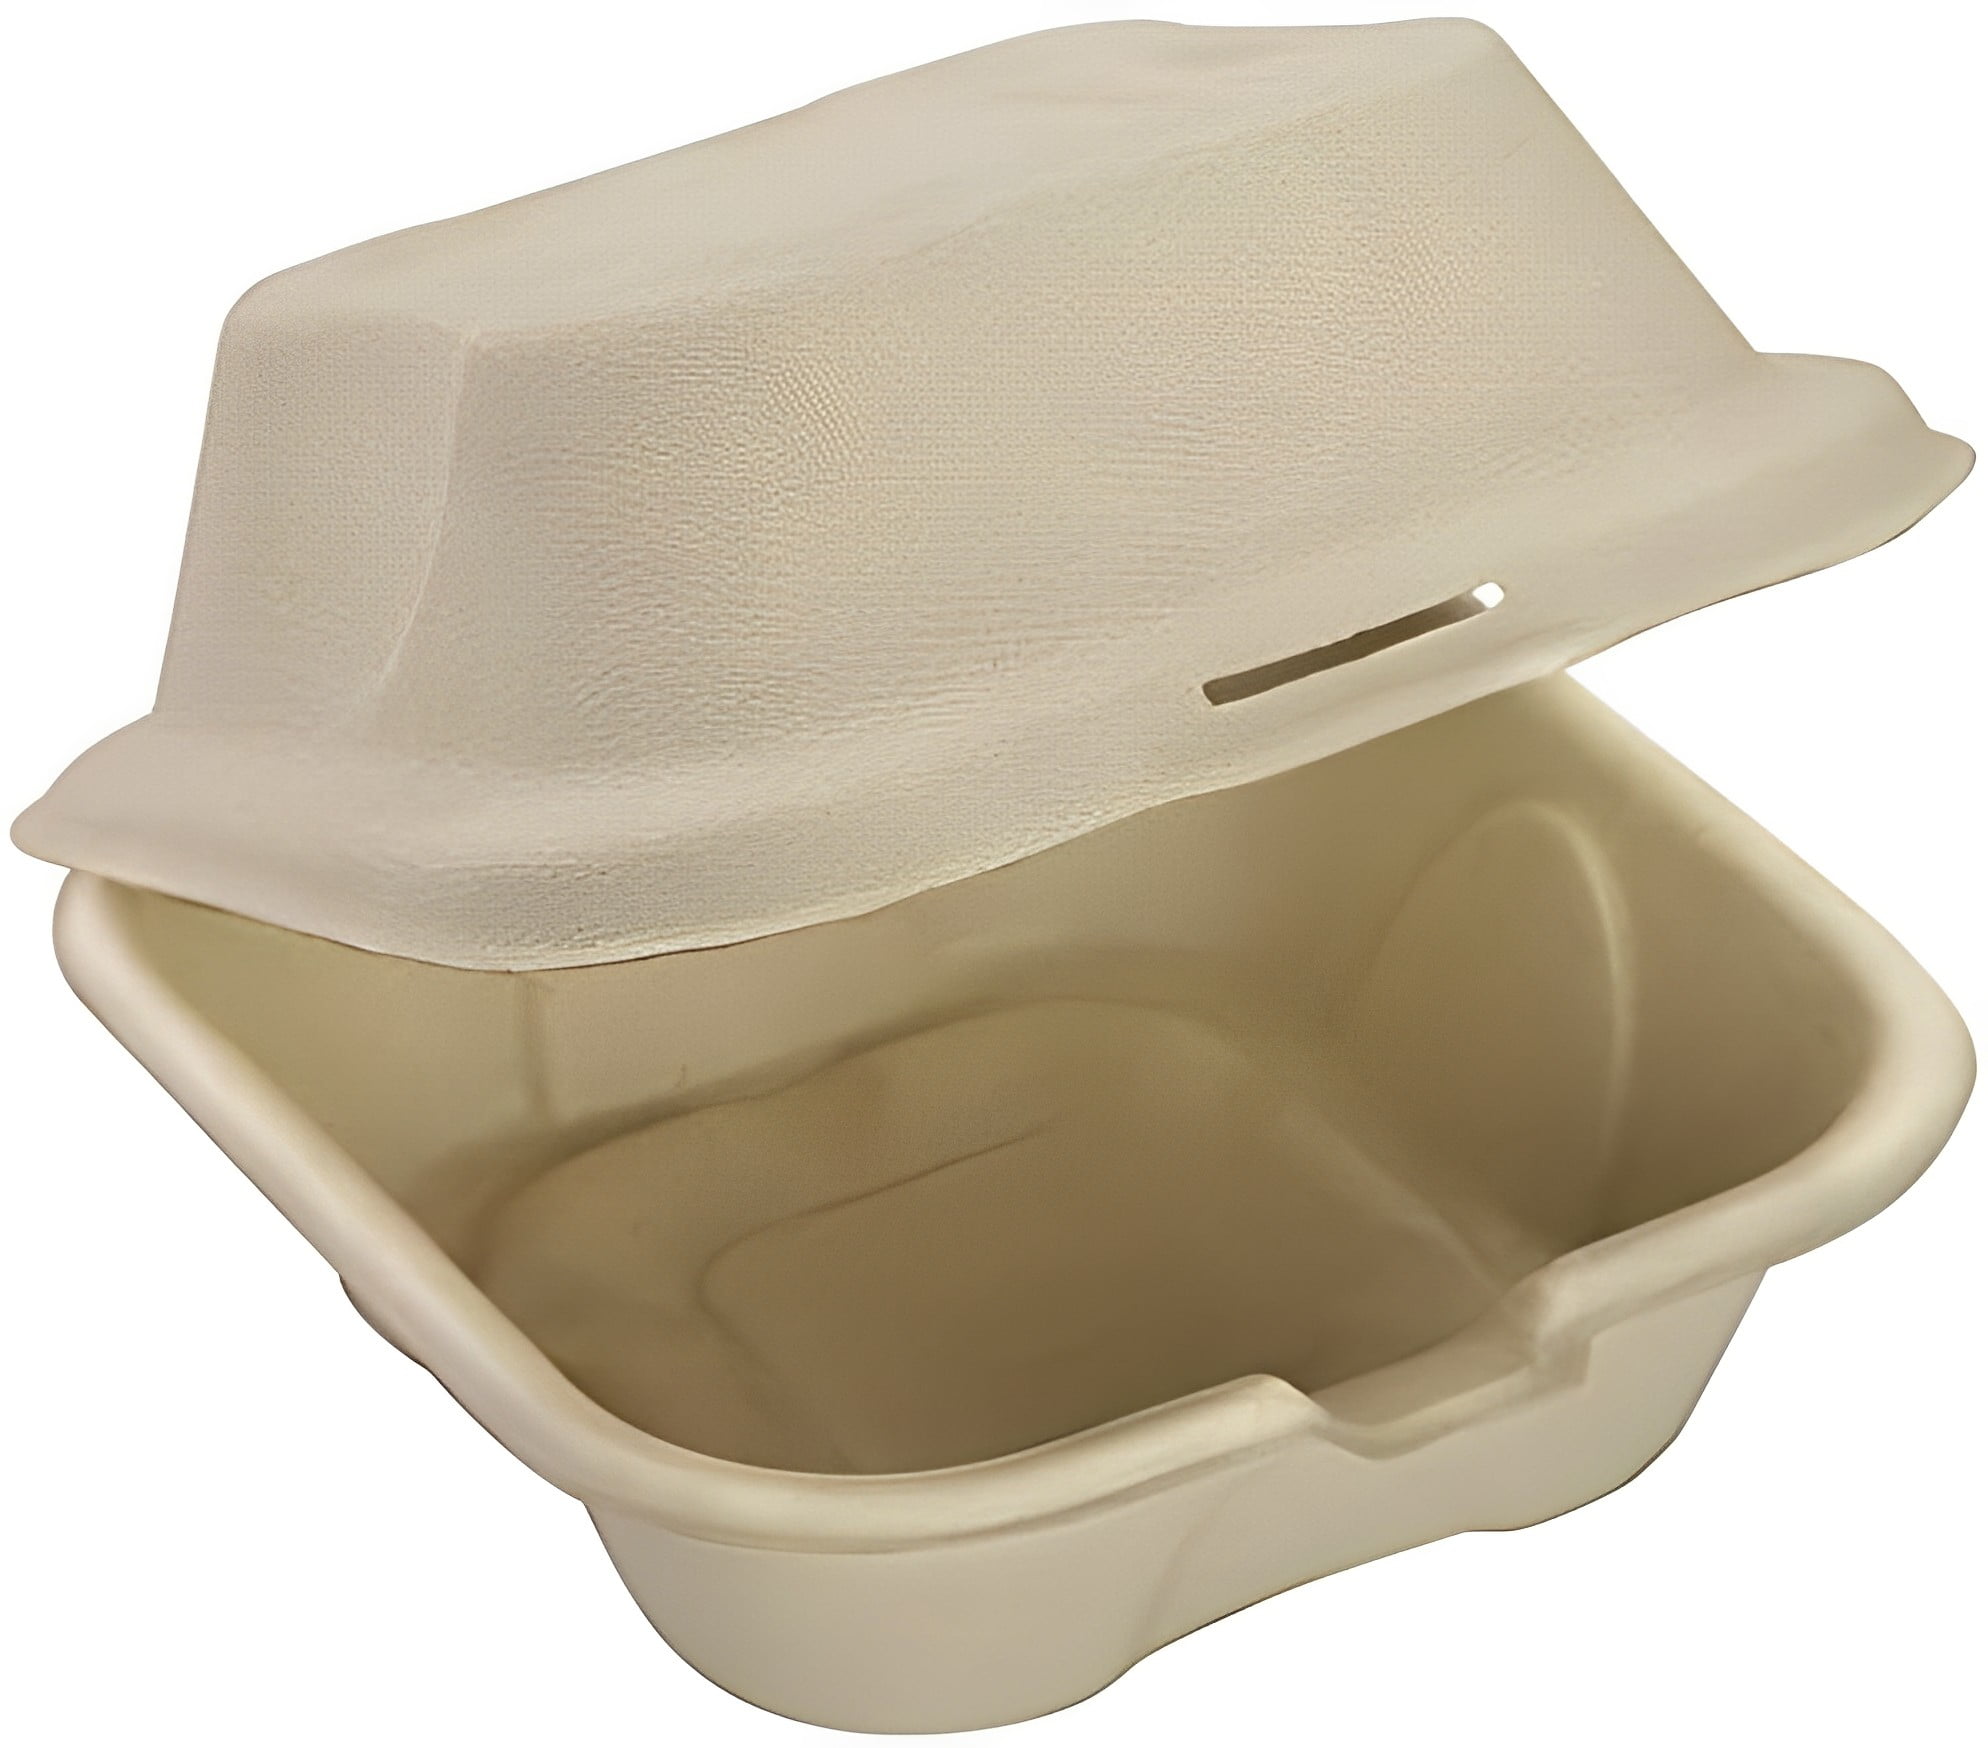 Dayshia 6 x 6 x 3 Molded Fiber Take Out Food Containers (Set of 30) Prep & Savour